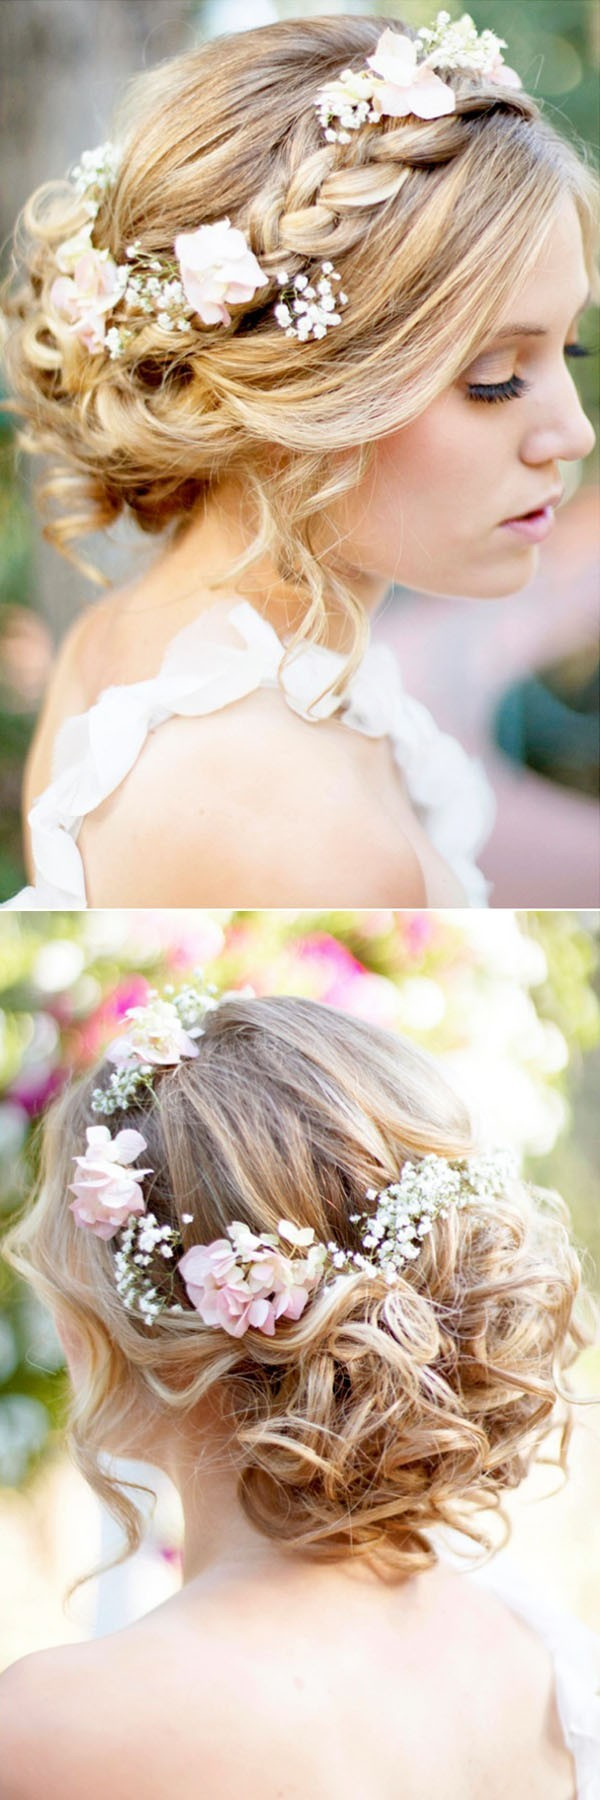 Prom Hairstyle With Flowers
 18 Trending Wedding Hairstyles with Flowers Oh Best Day Ever